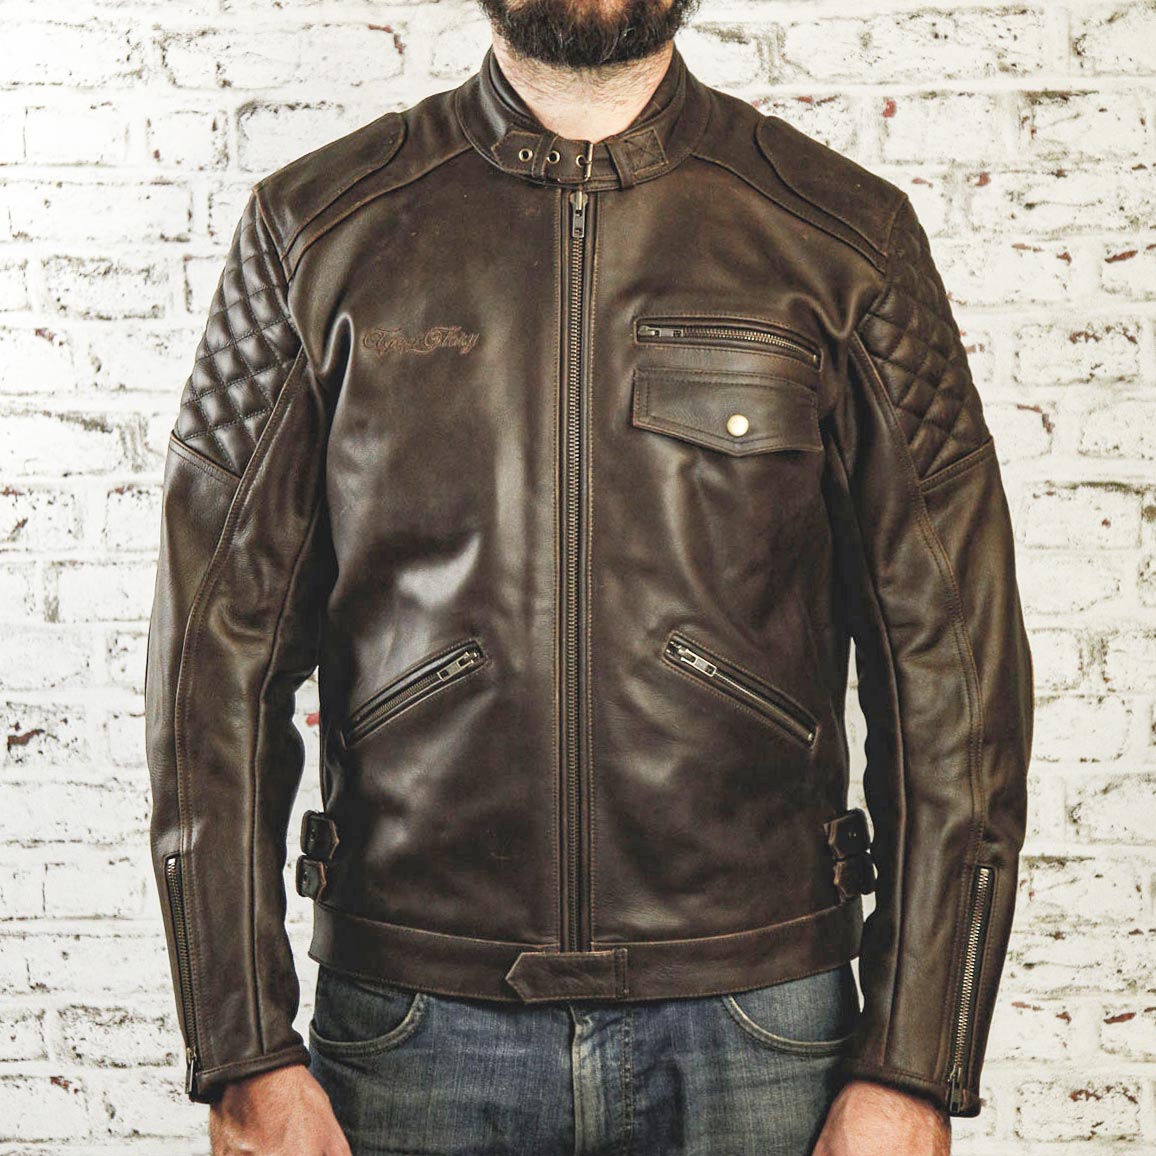 Age of Glory Kingpin leather jacket brown